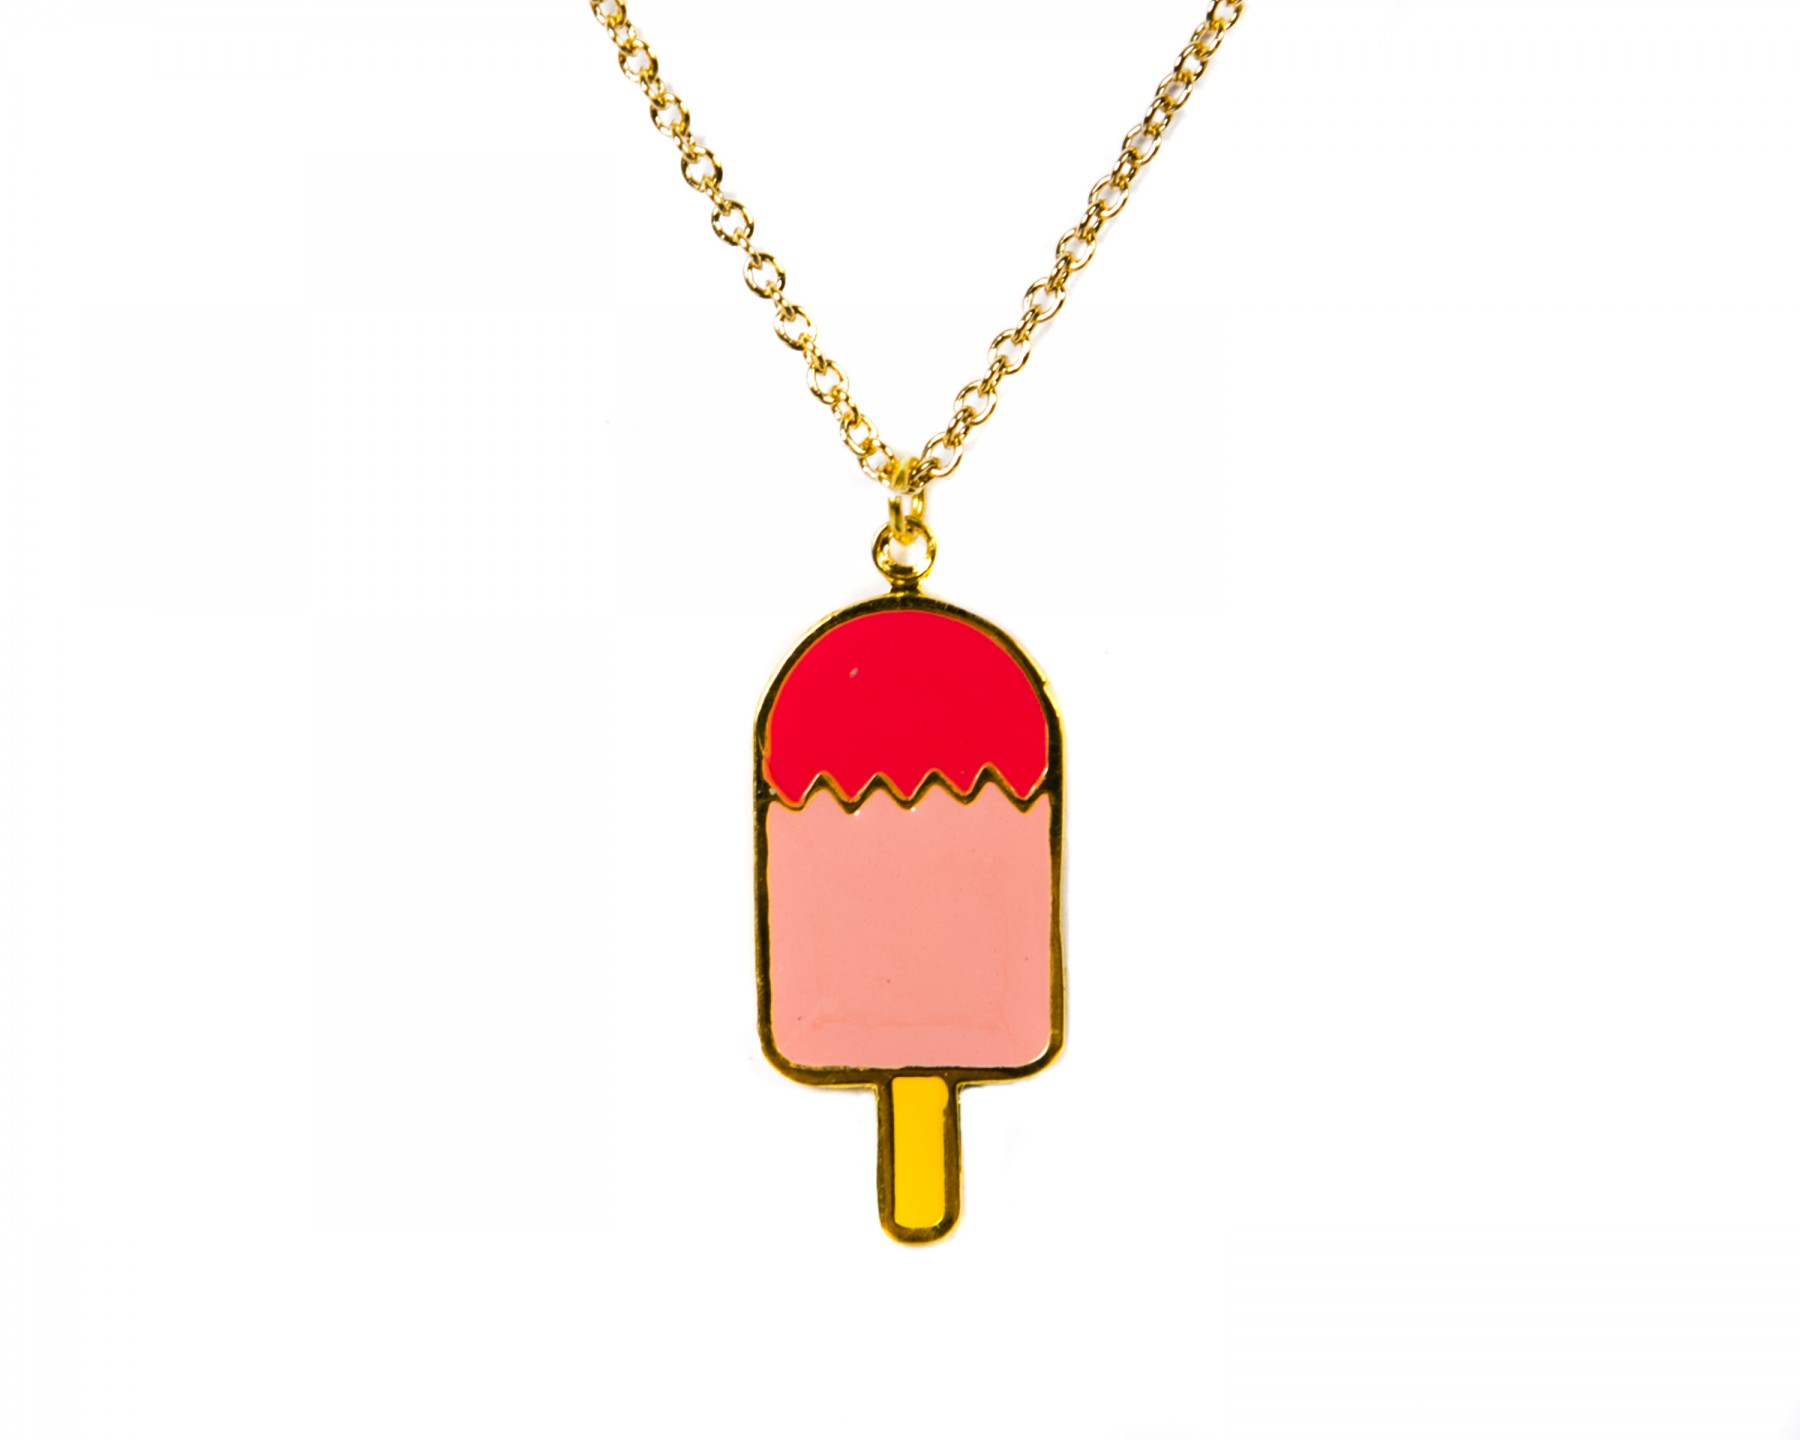 Mary lolly necklace